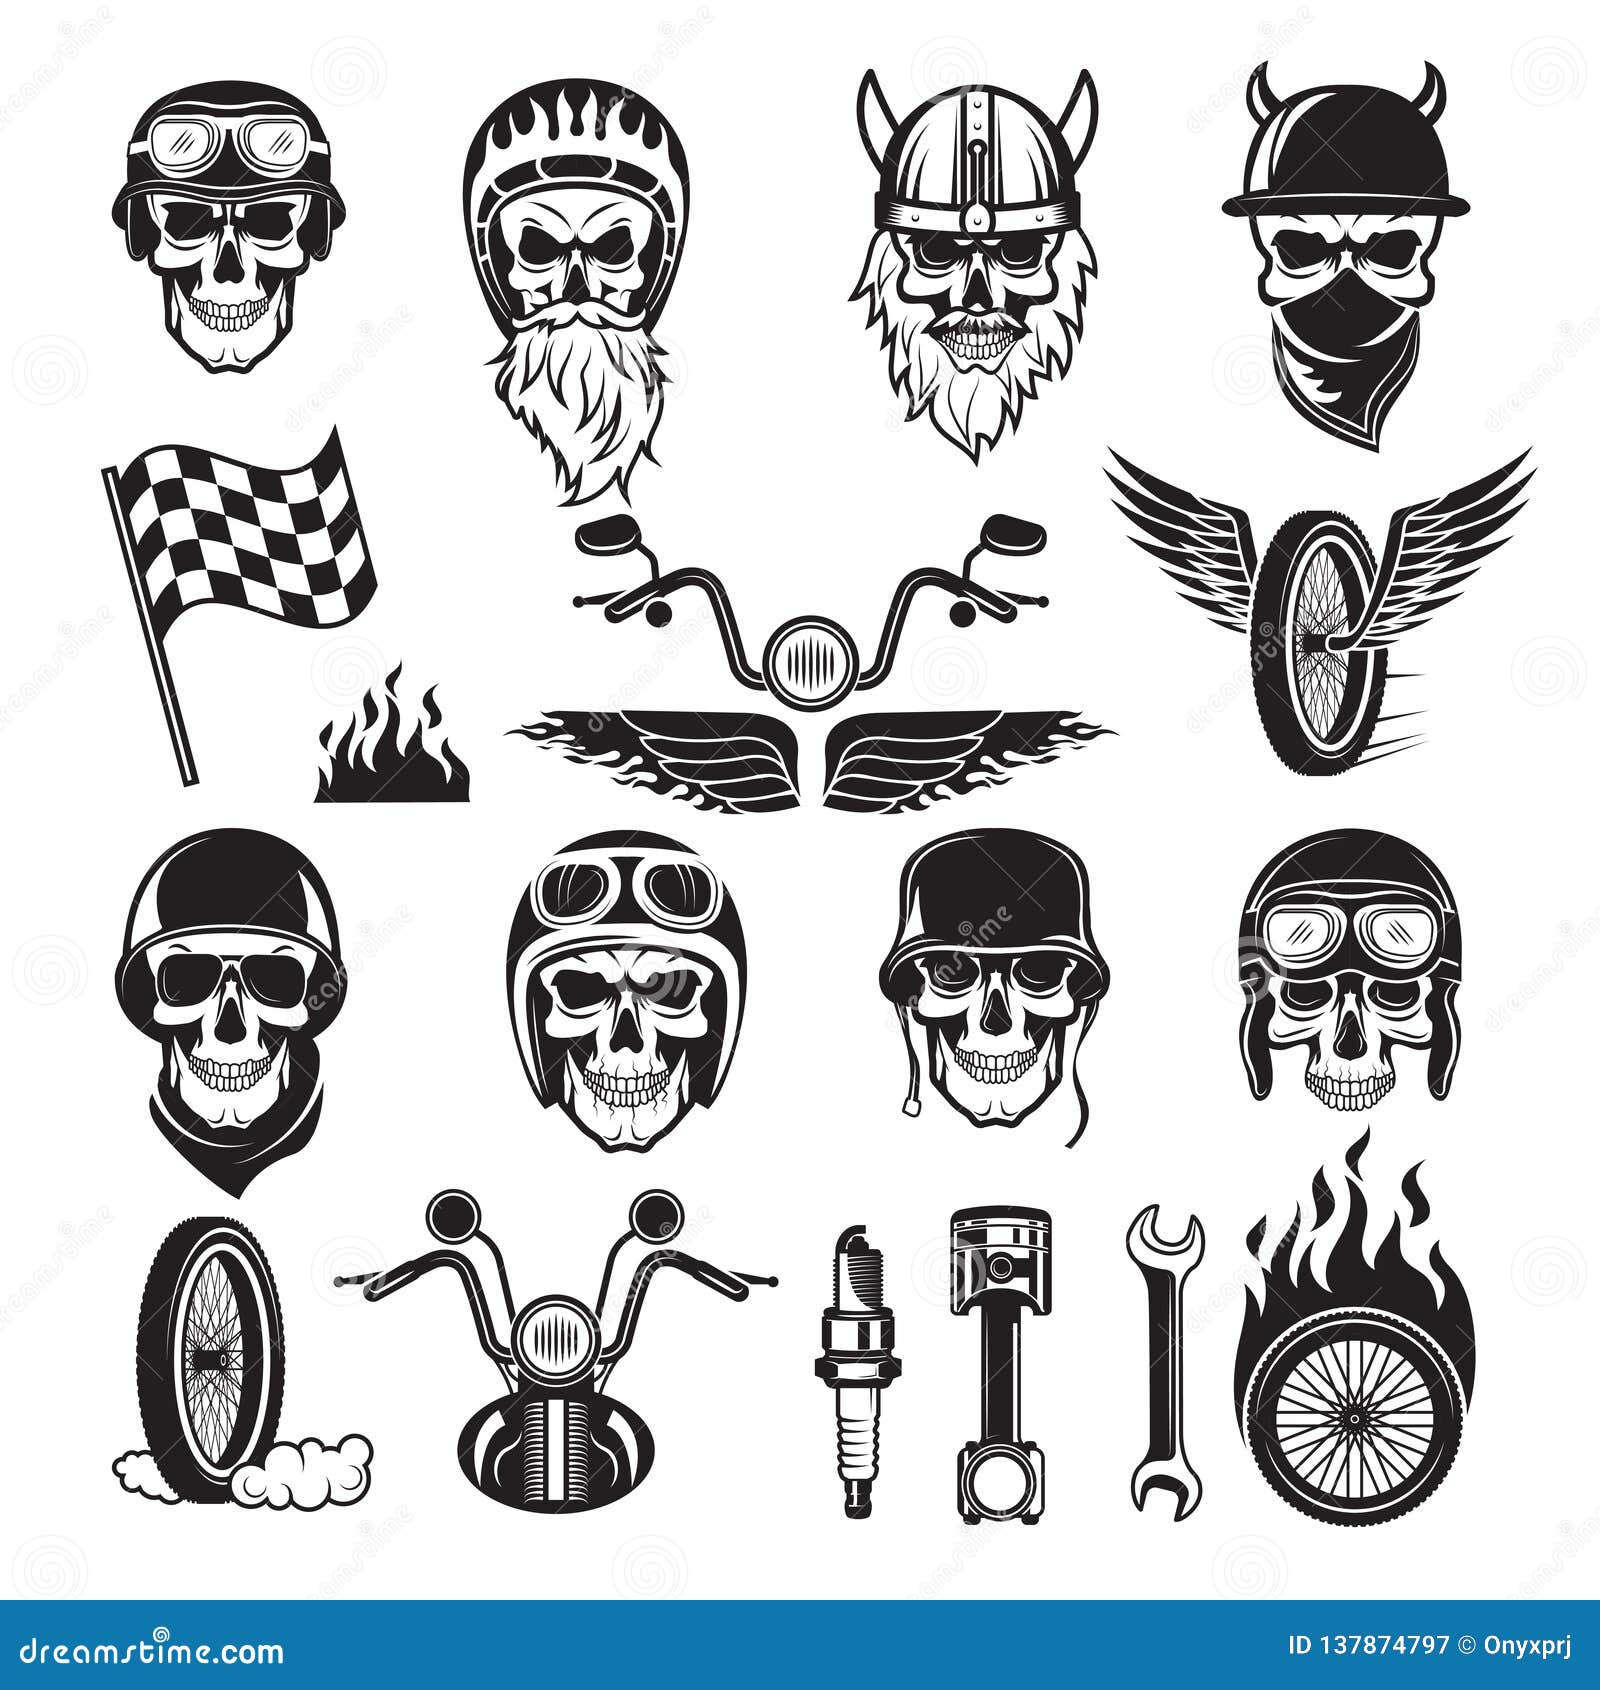 Details about   New Plastic Biker Motorcycle Enthusiast Easy Throttle Skulls Flames Rider 